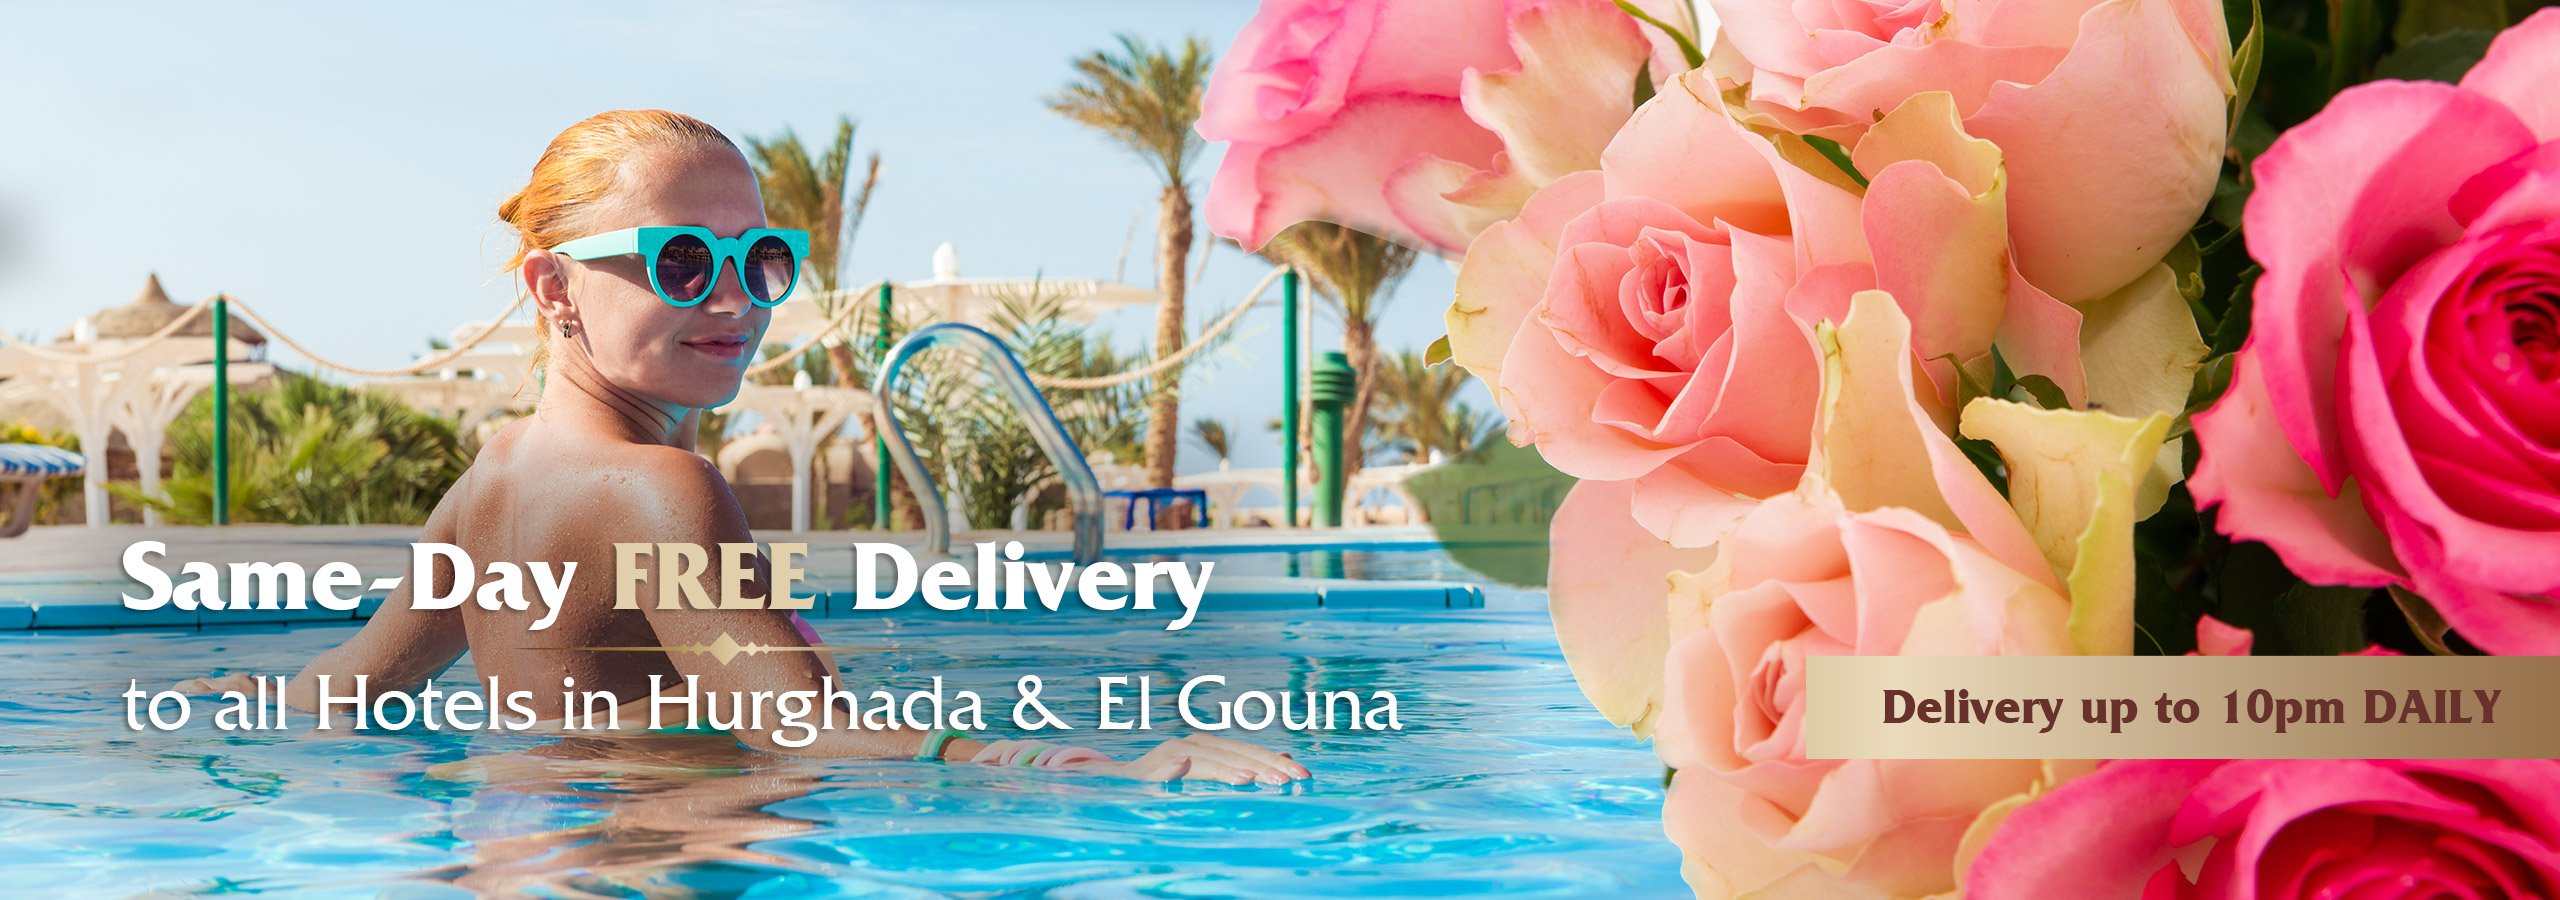 Same Day Flower Delivery Hurghada